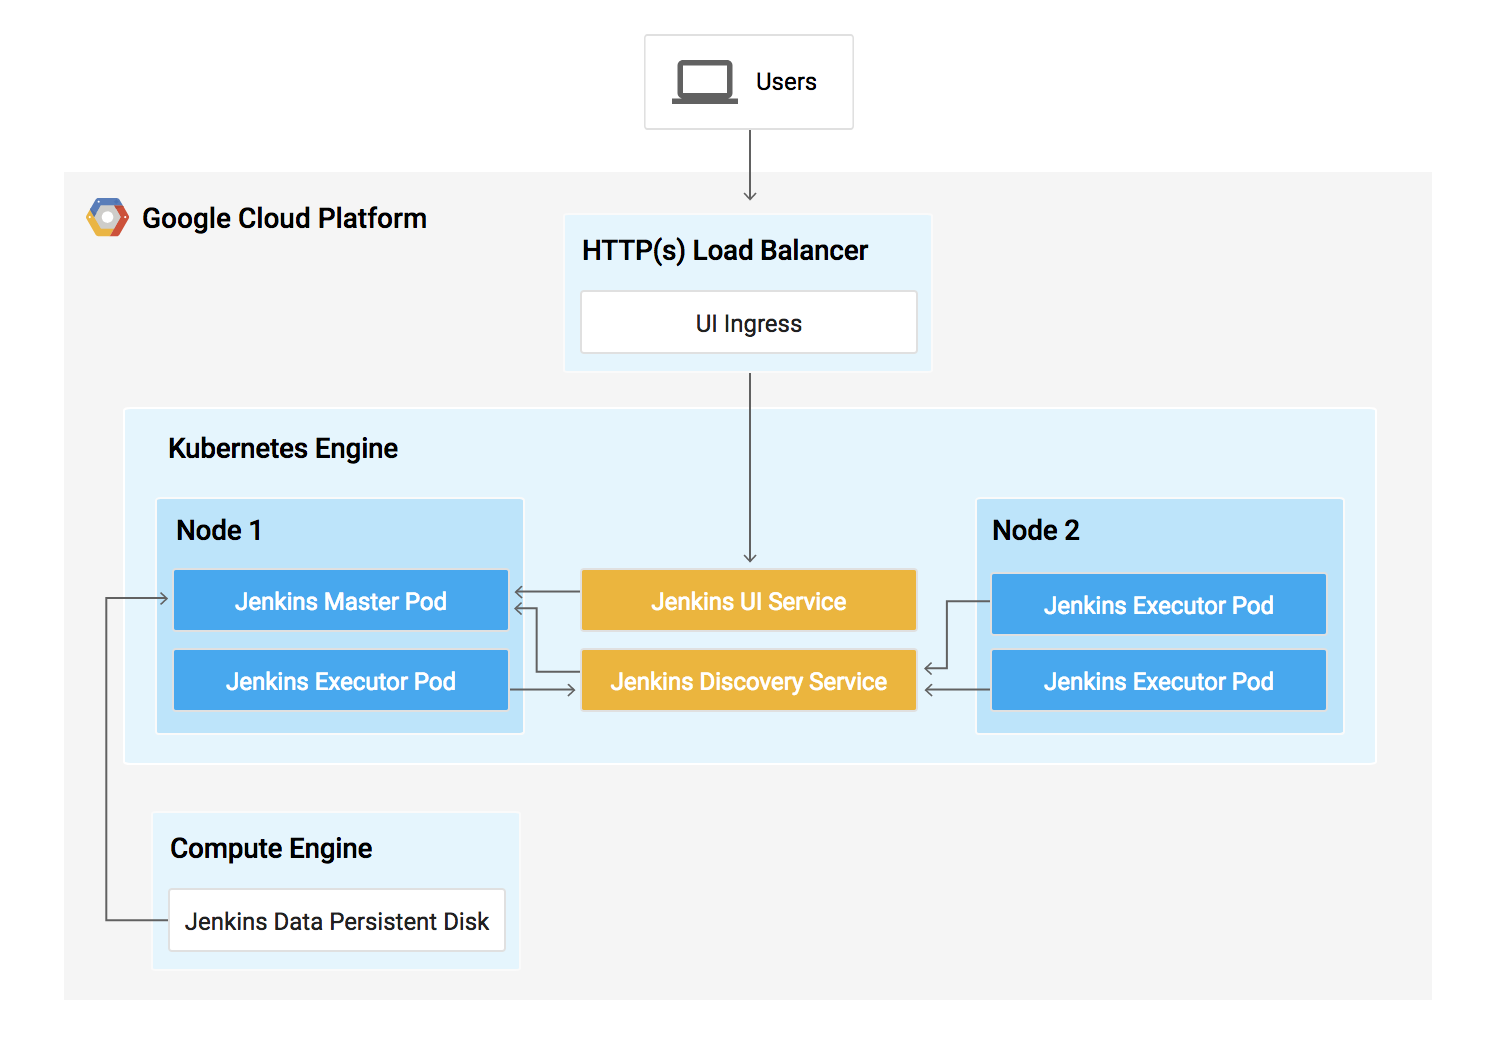 Continuous Delivery with Jenkins in Kubernetes Engine